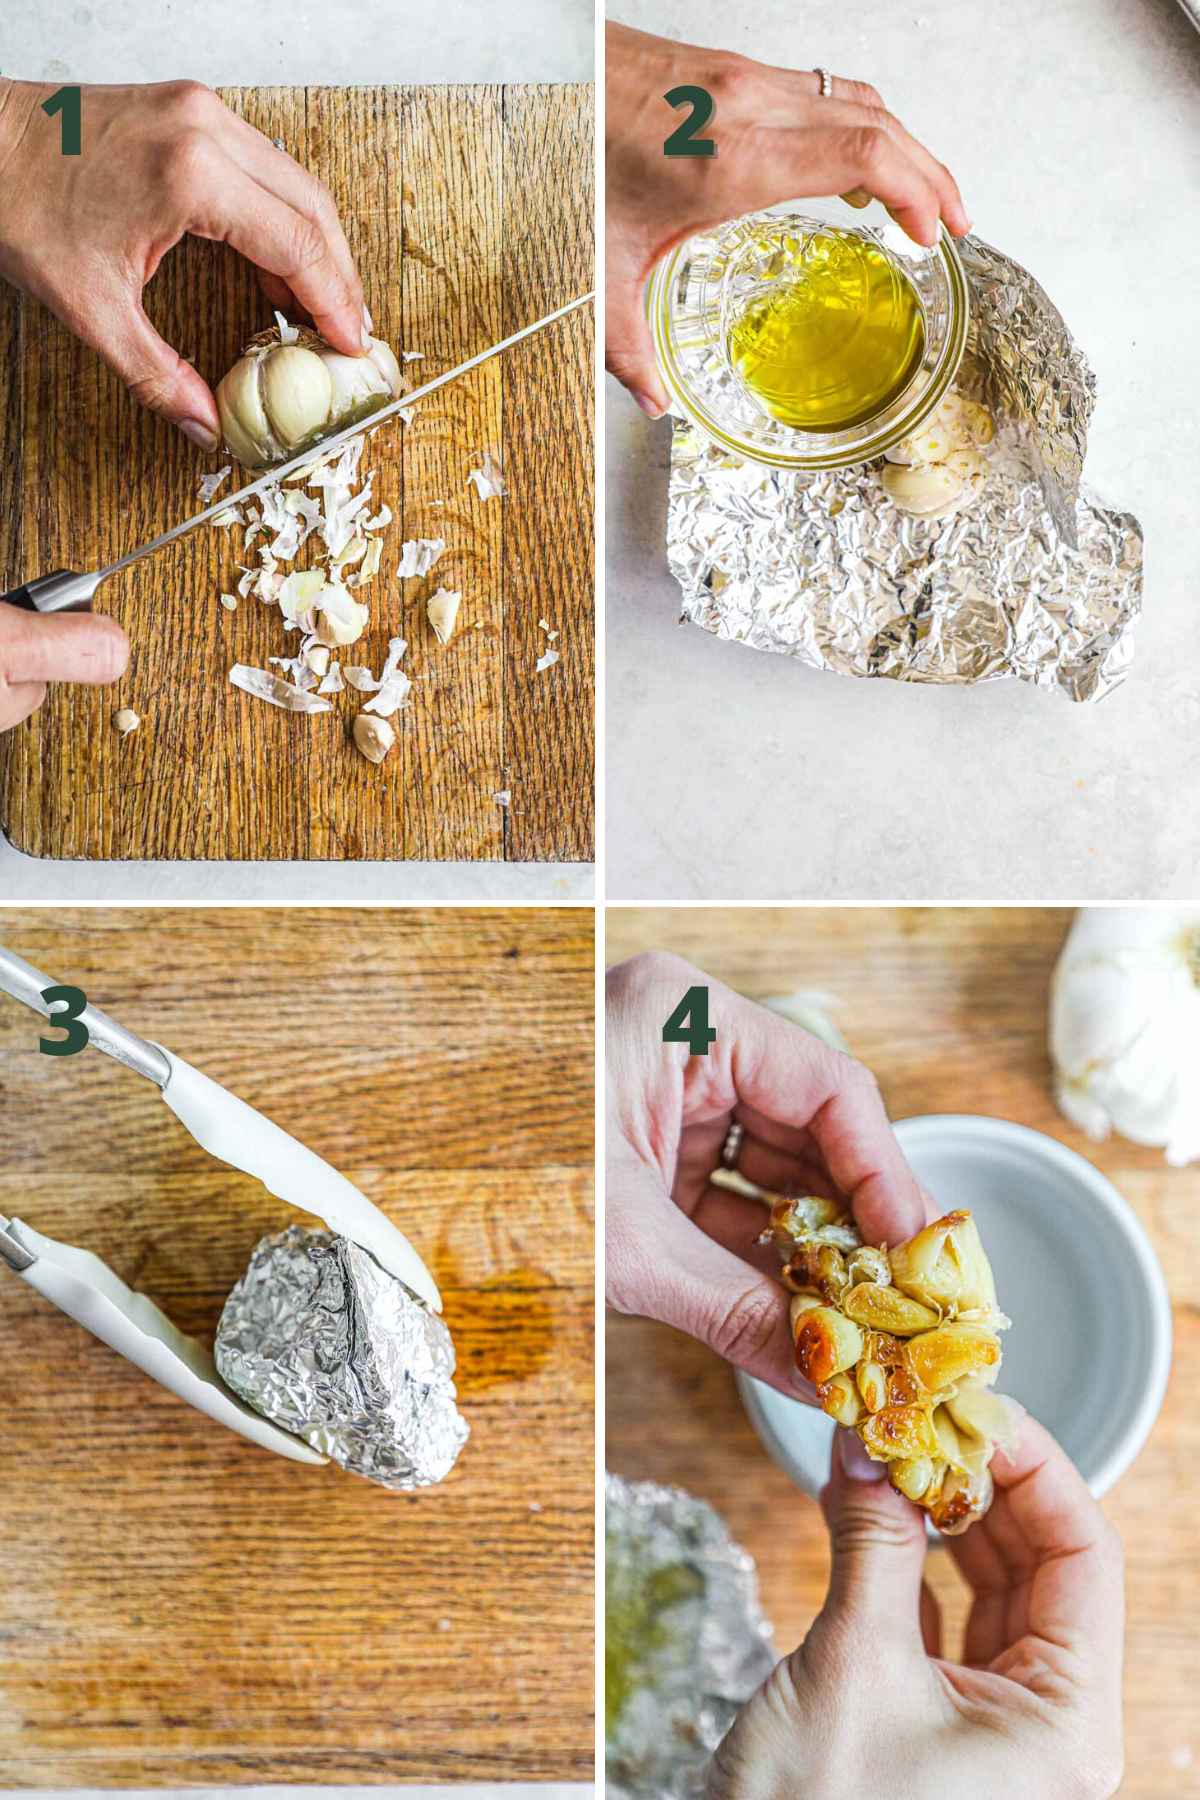 Steps to make roasted garlic mashed potatoes, cut garlic bulb, add olive oil, wrap in foil, roast, and remove roasted cloves.